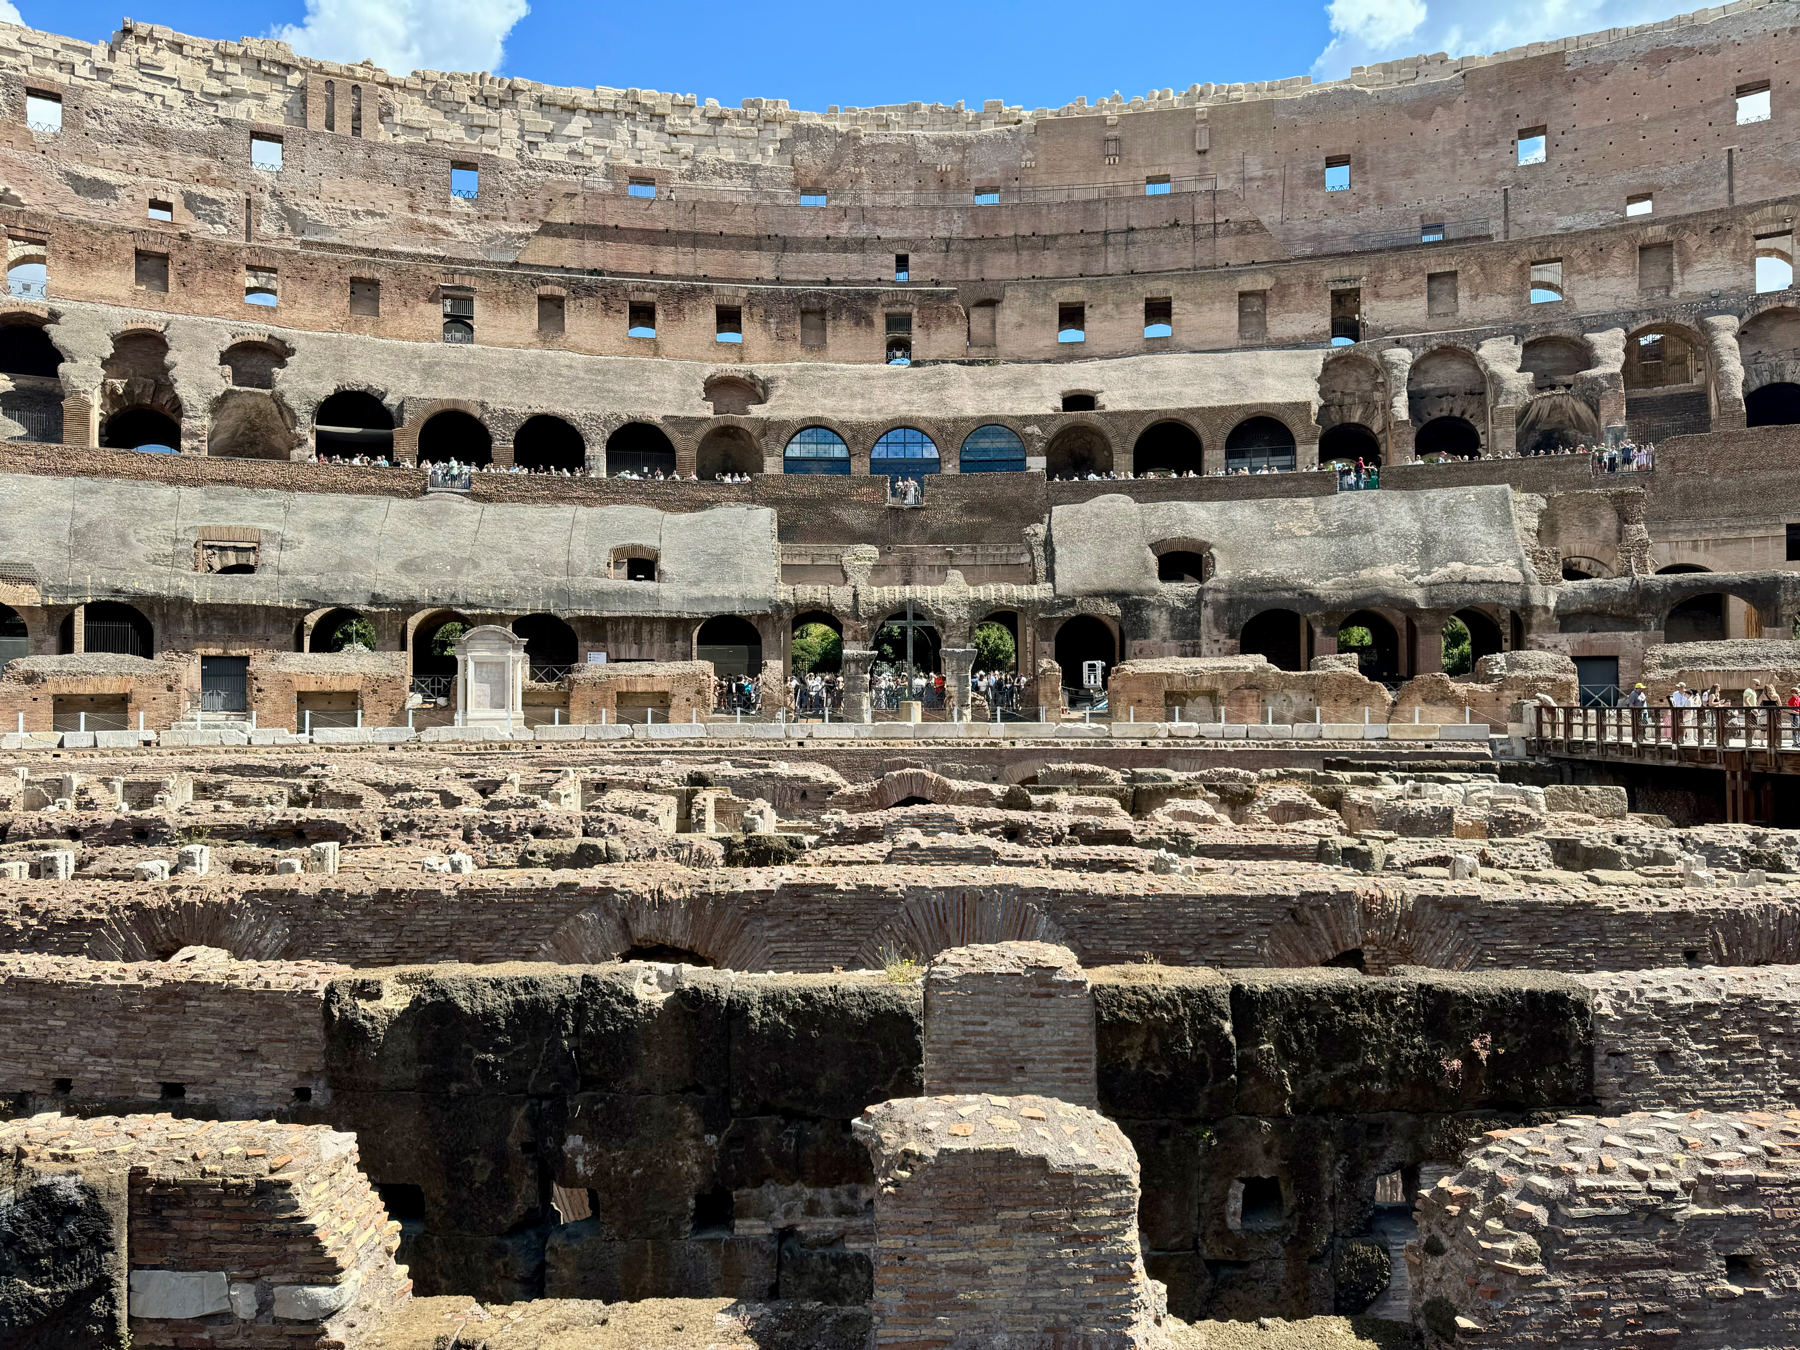 Interior of the Colosseum in Rome, featuring ancient stone ruins and structural remains of the amphitheater. Multiple levels of arches and seating are visible, alongside groups of visitors exploring the site. Bright sunny sky above with minimal clouds.